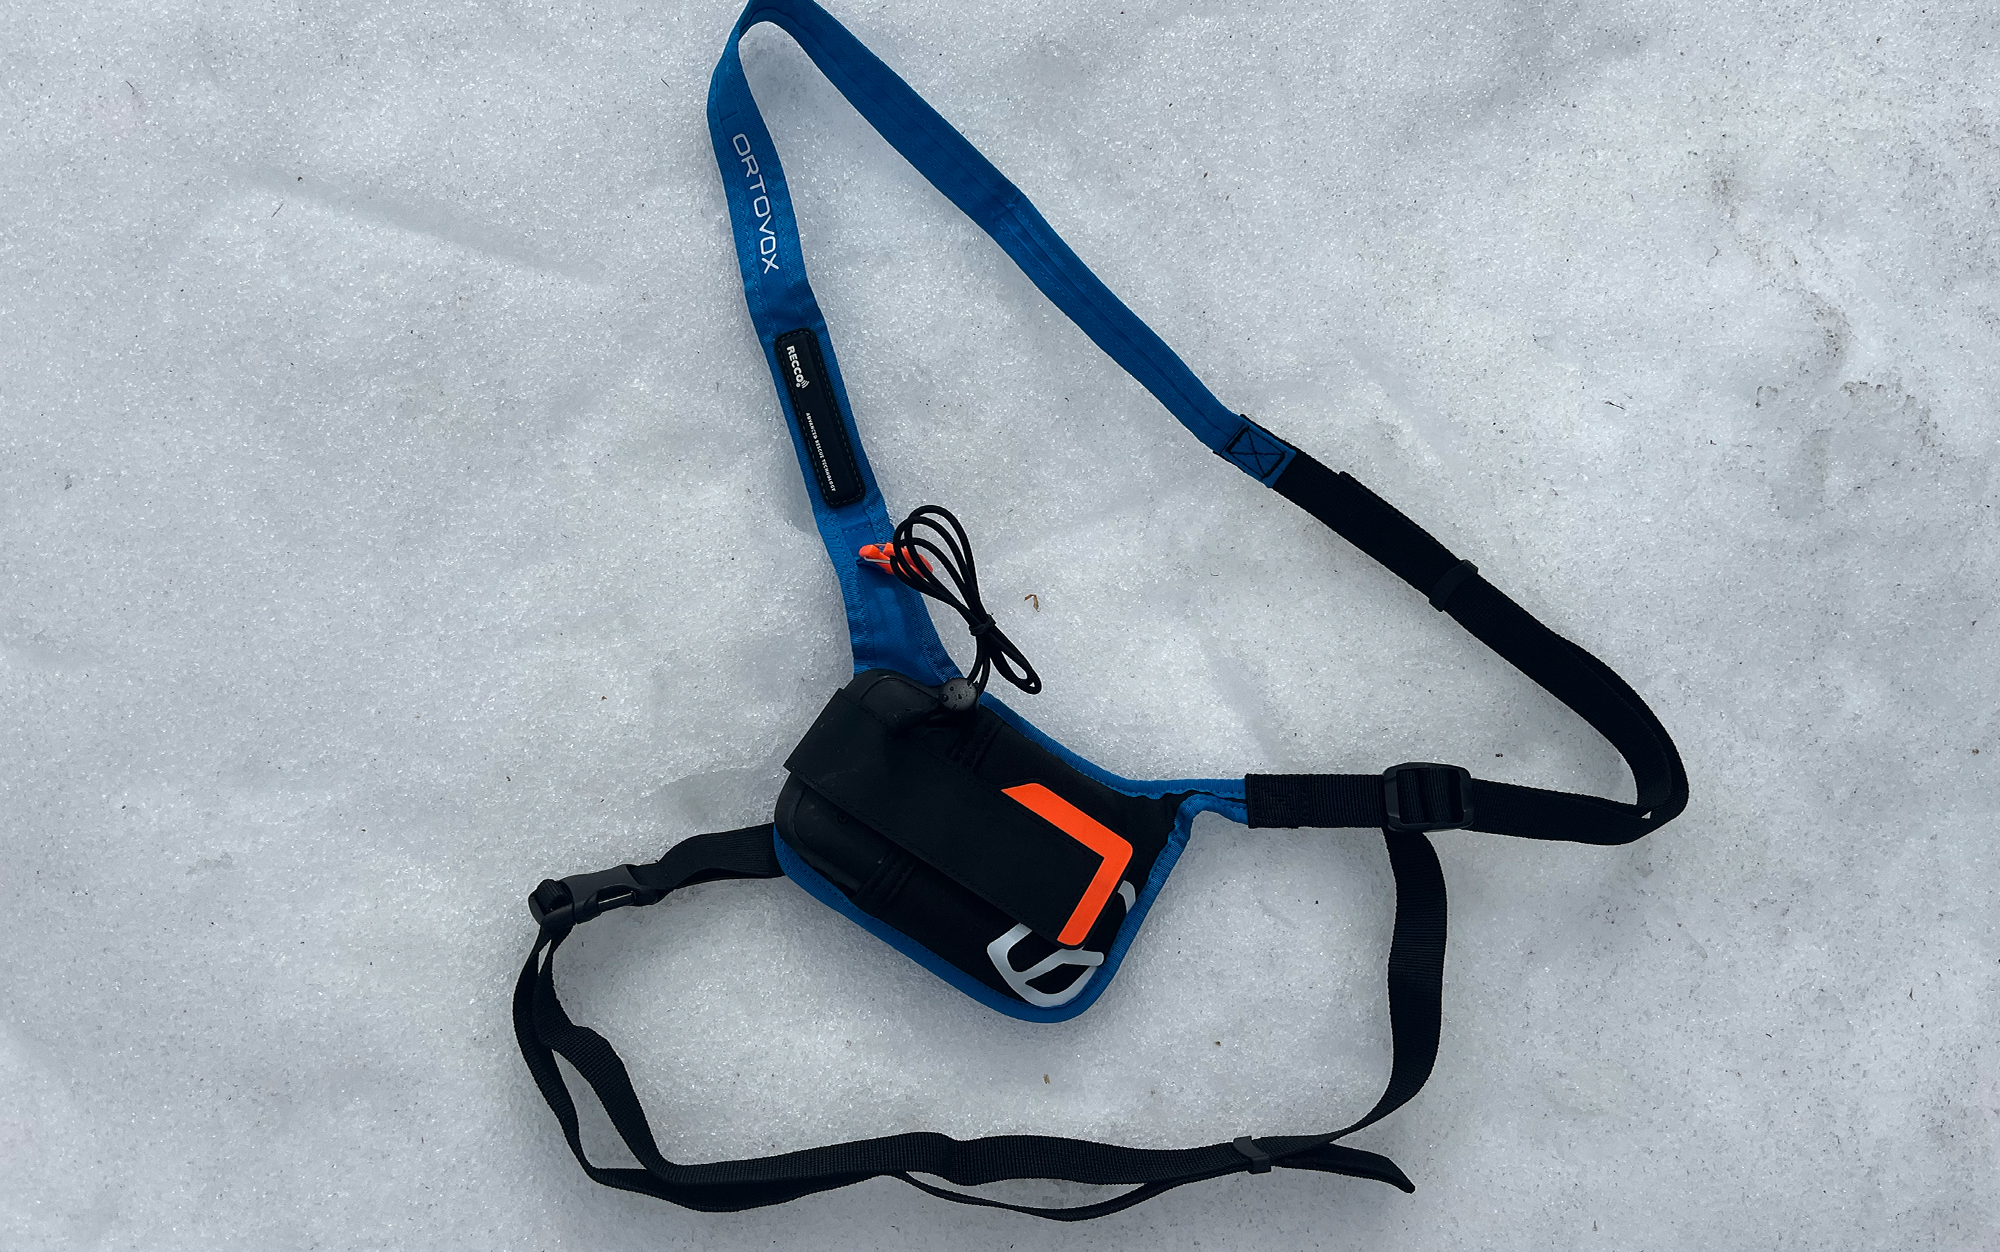 Ortovox Diract Voice harness sits in the snow.